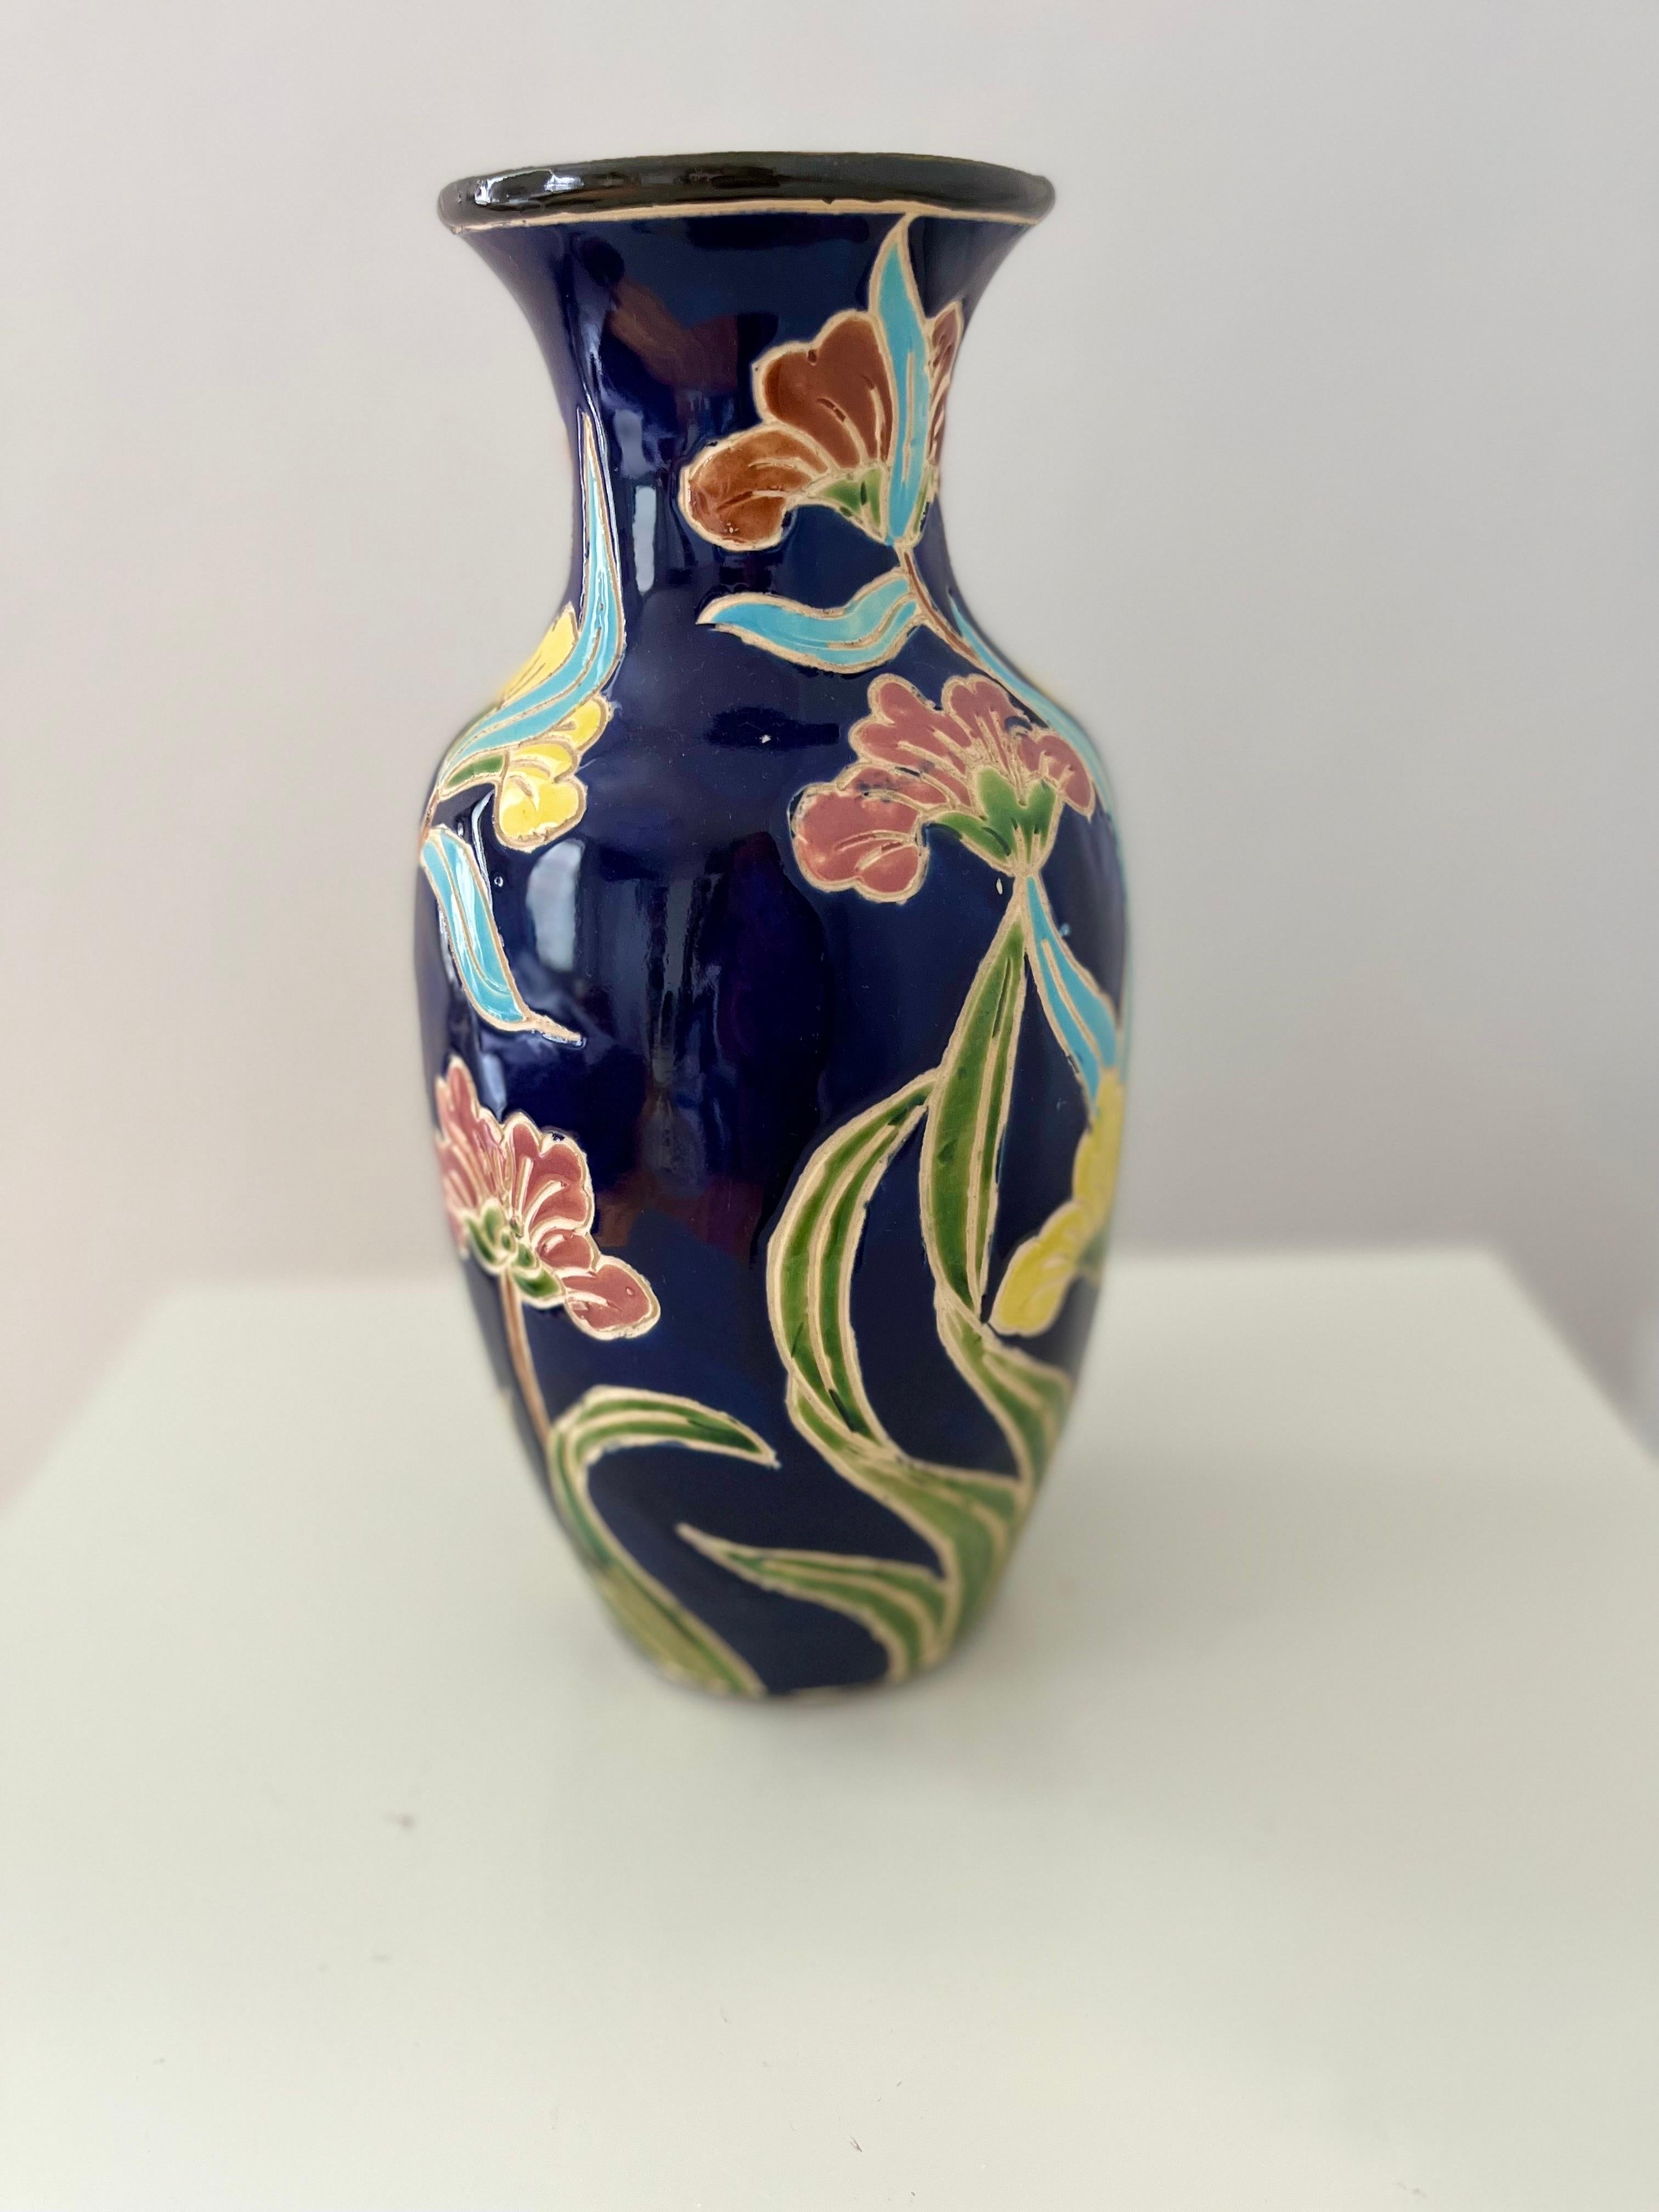 Engraved 1960s/1970s Scandinavian Organic Modern Ceramic Vase with Colorful Floral Motifs For Sale